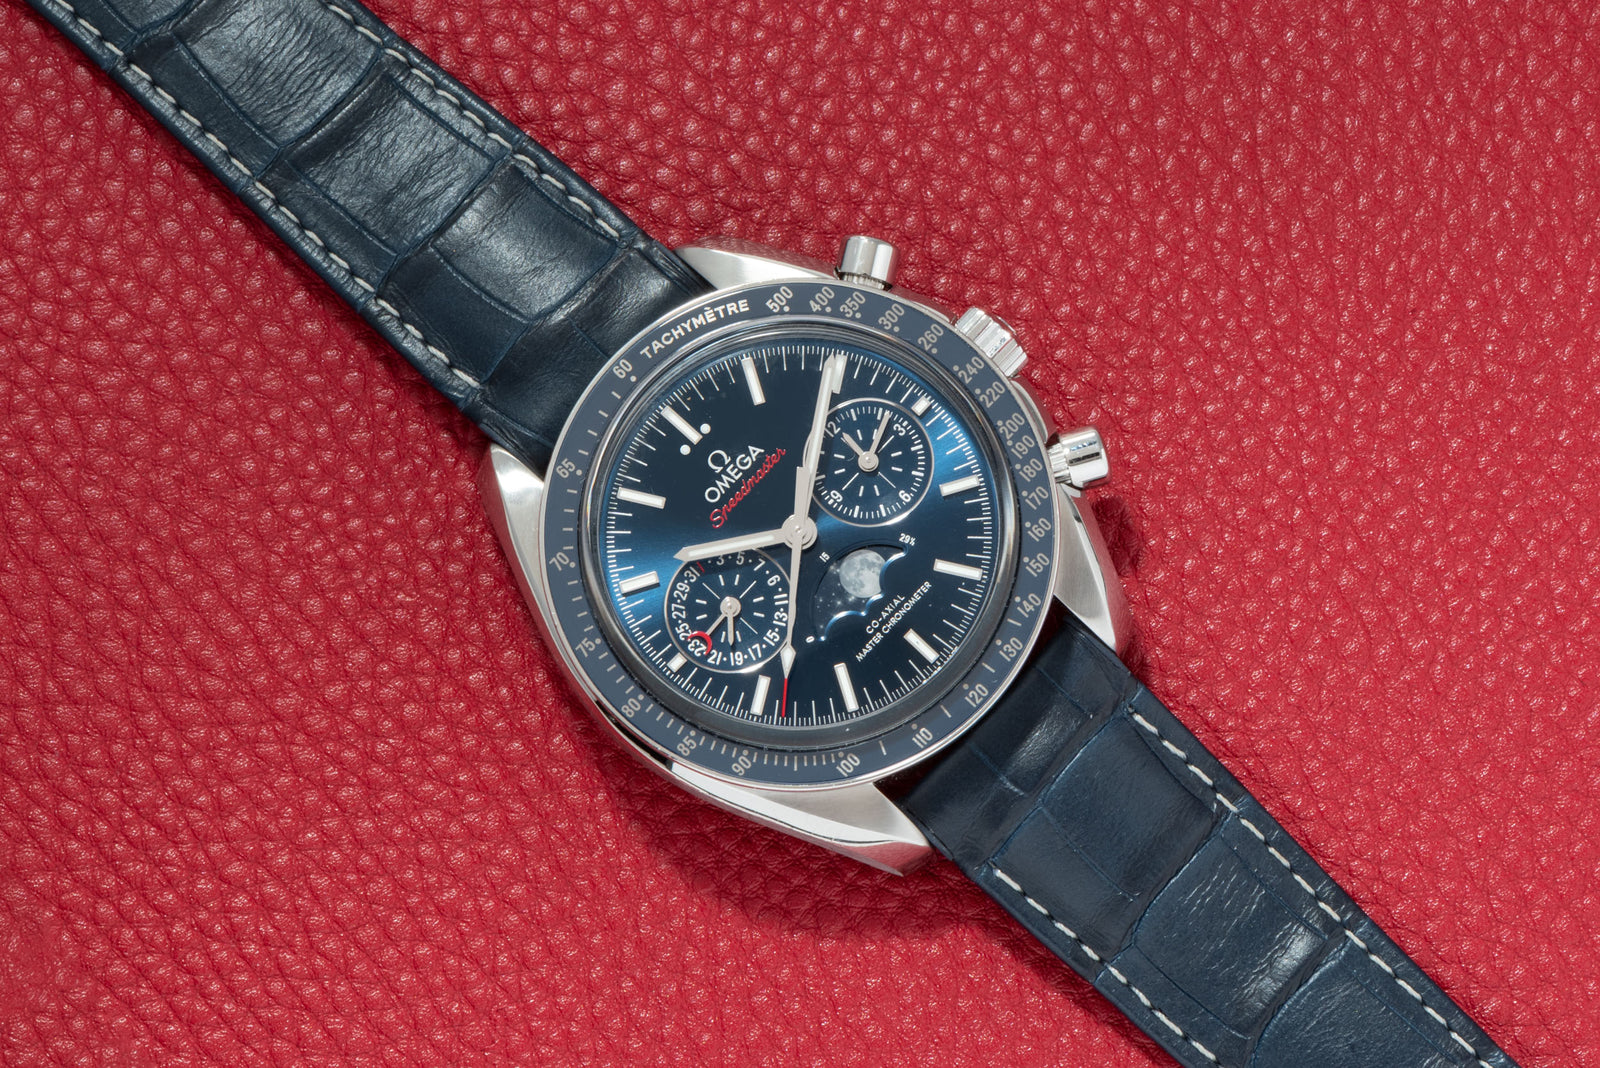 Omega Speedmaster Co-Axial Moonphase Chronograph